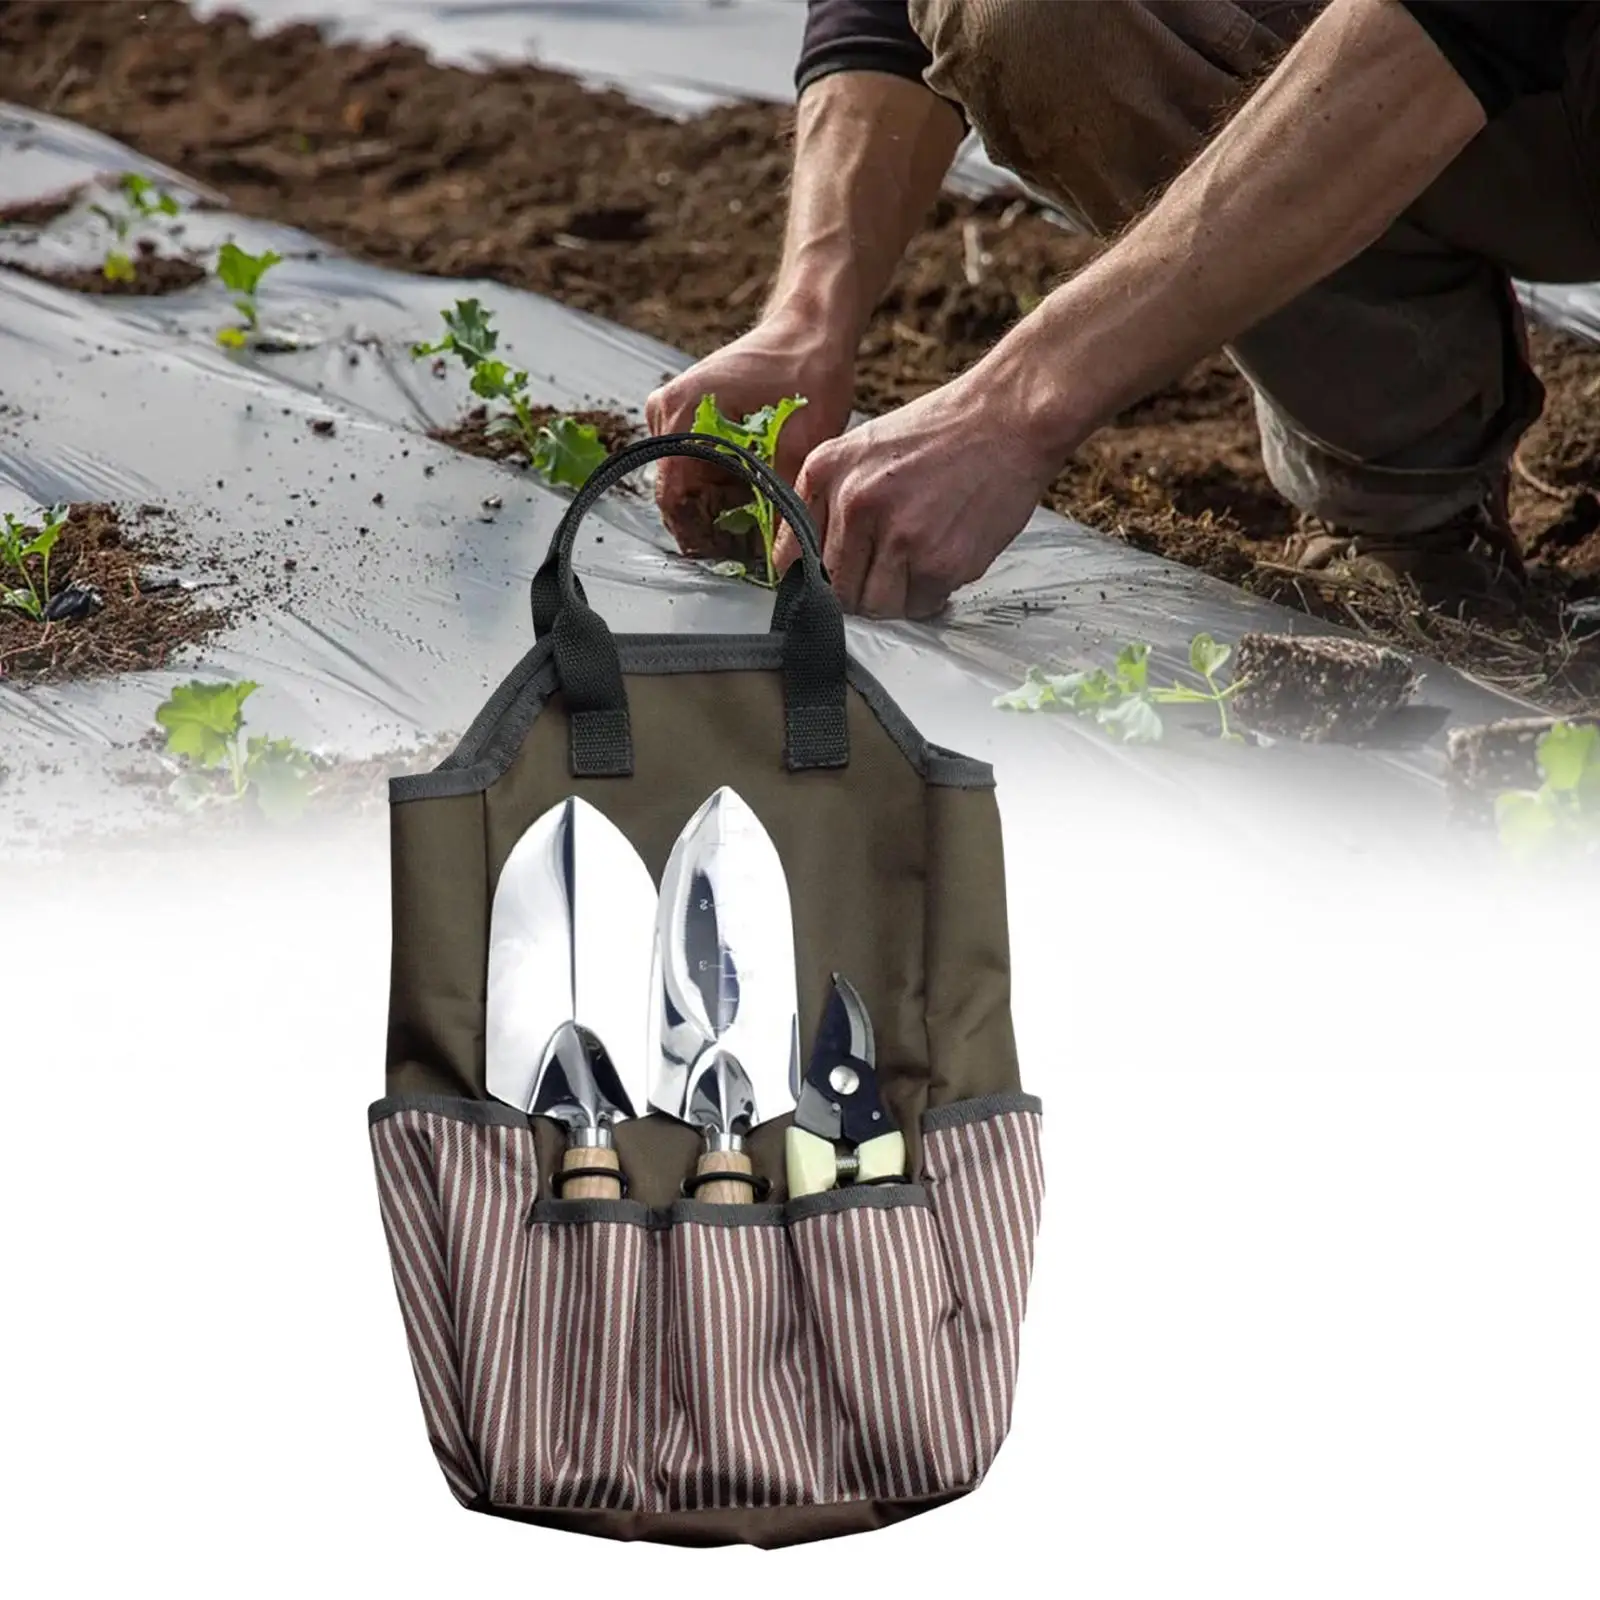 Garden Bags Heavy Duty Oxford Cloth Multipurpose Yard Tool Organizer with Handle Garden Tote Storage Bag for Gardening Gifts